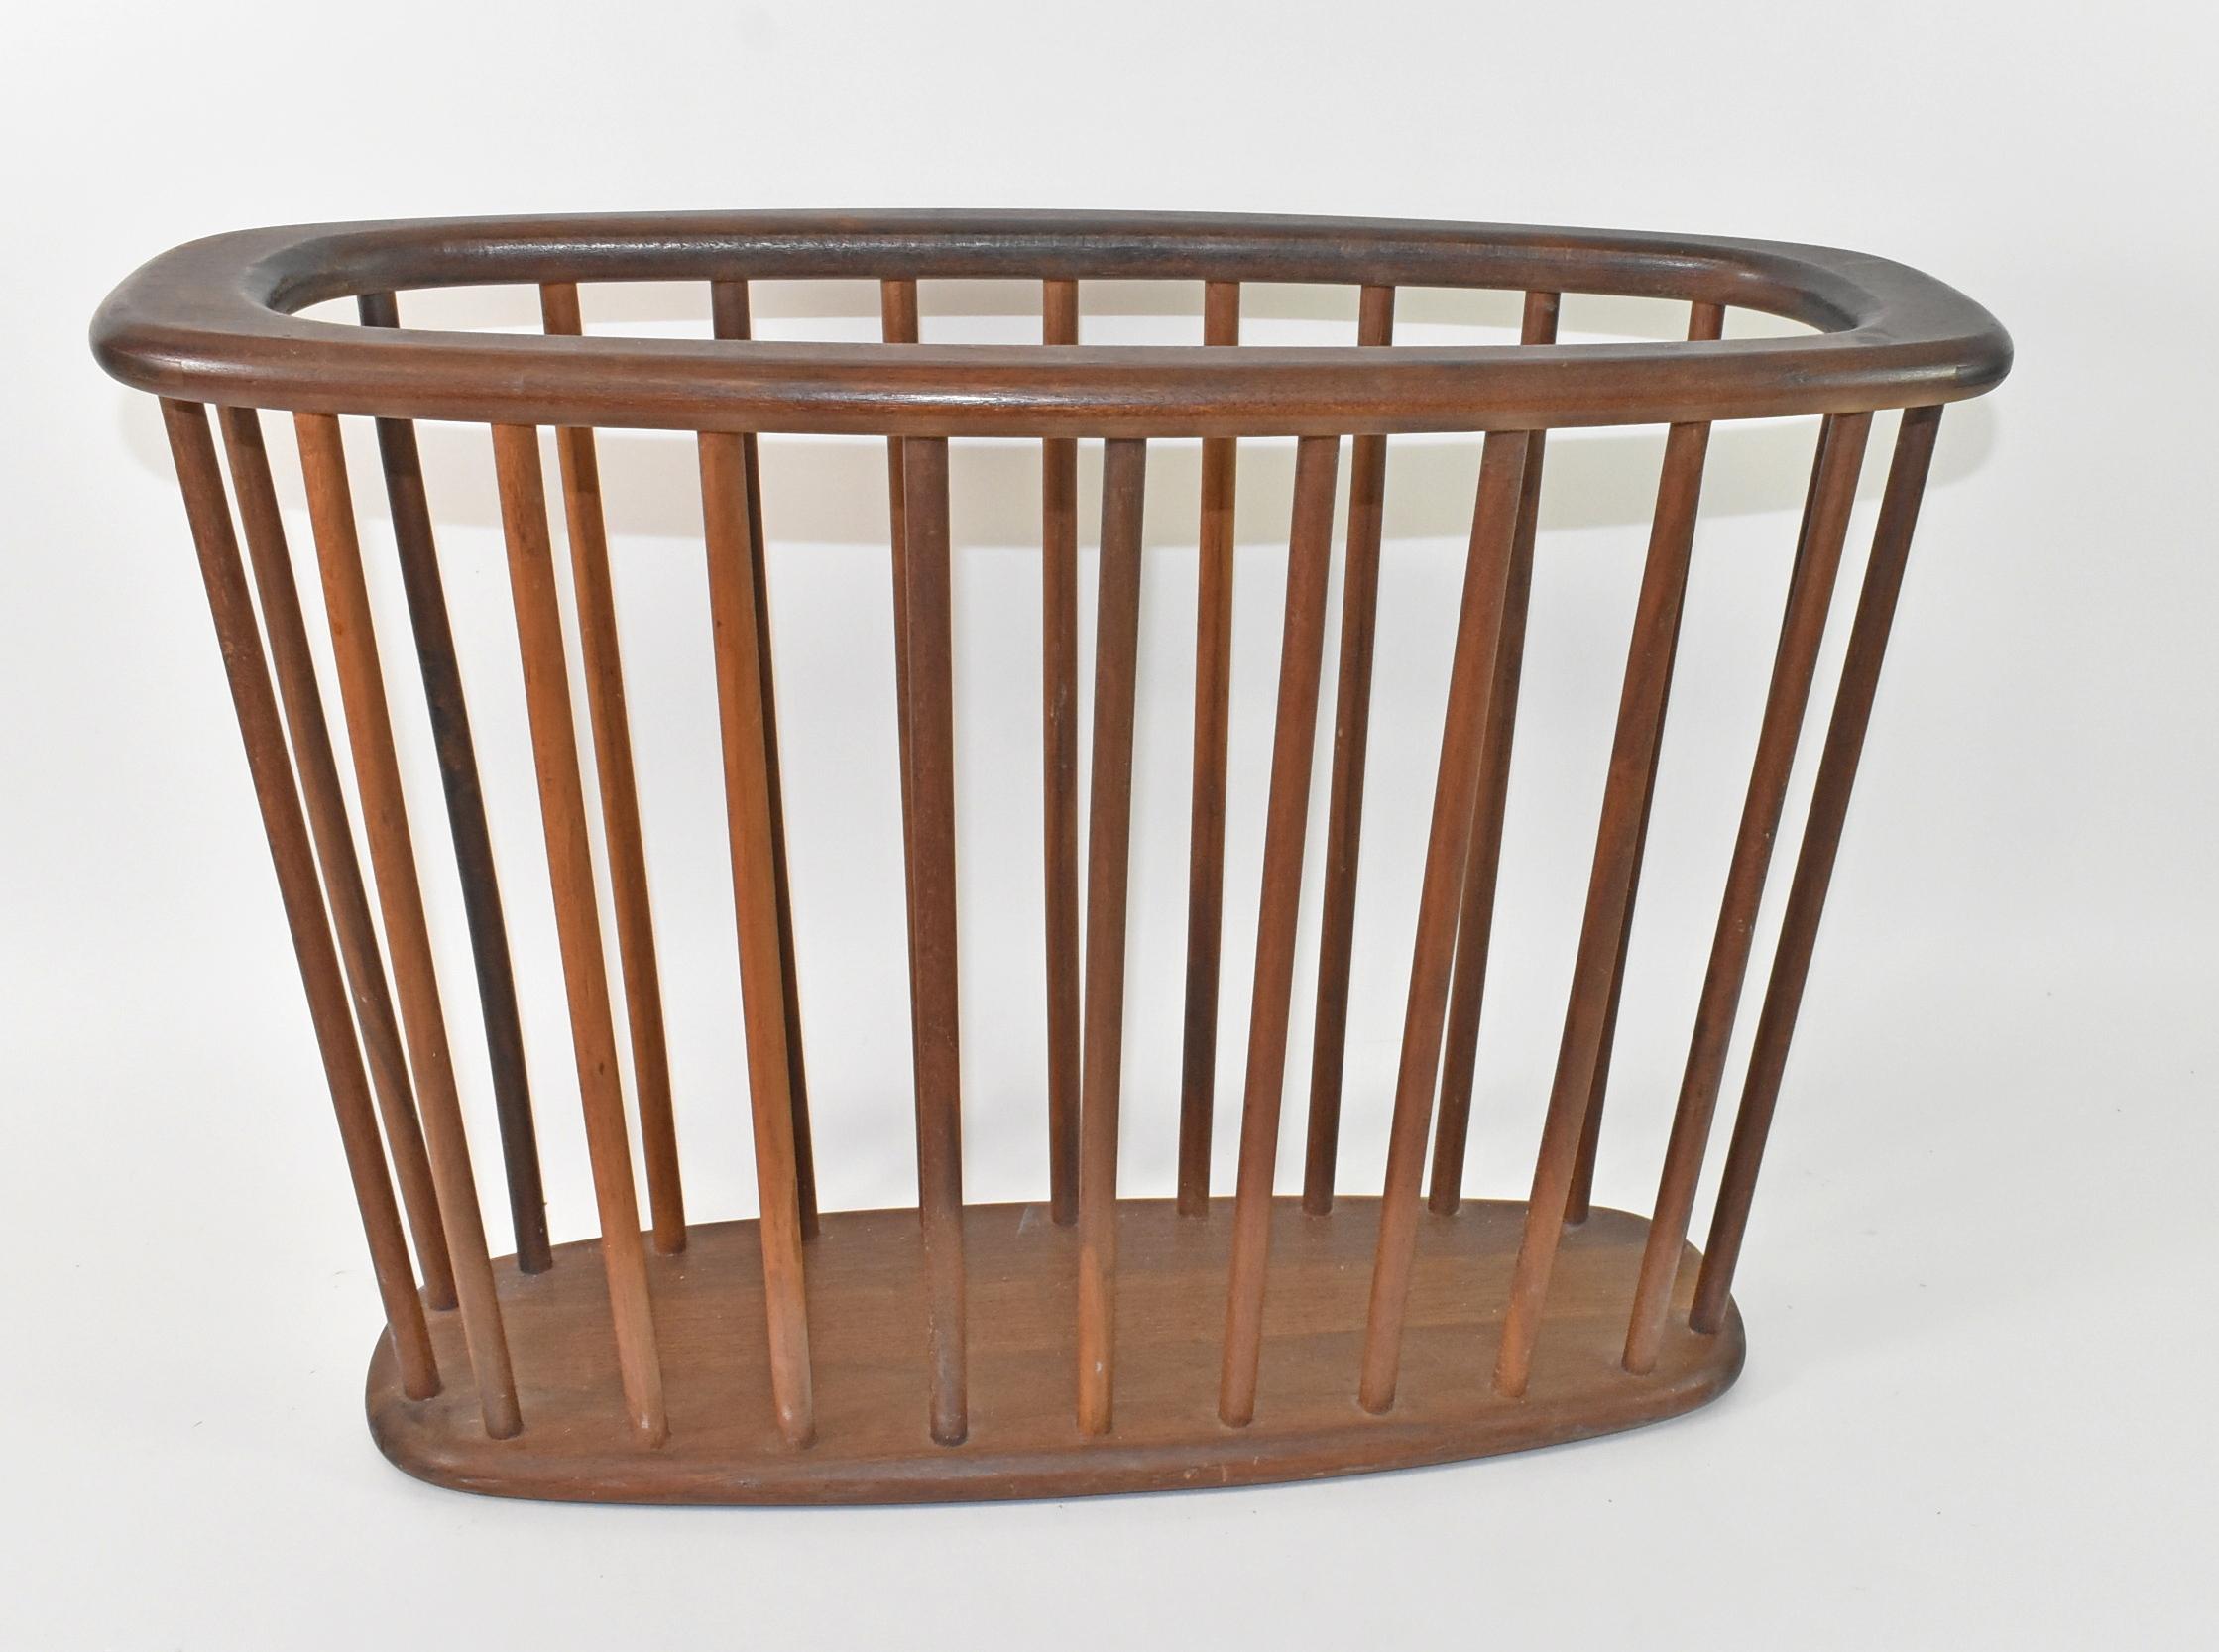 Vintage walnut mid century magazine rack. Circa 1960s. Original finish. Very good condition. 2 available, price reflects individual item. Dimensions: 21